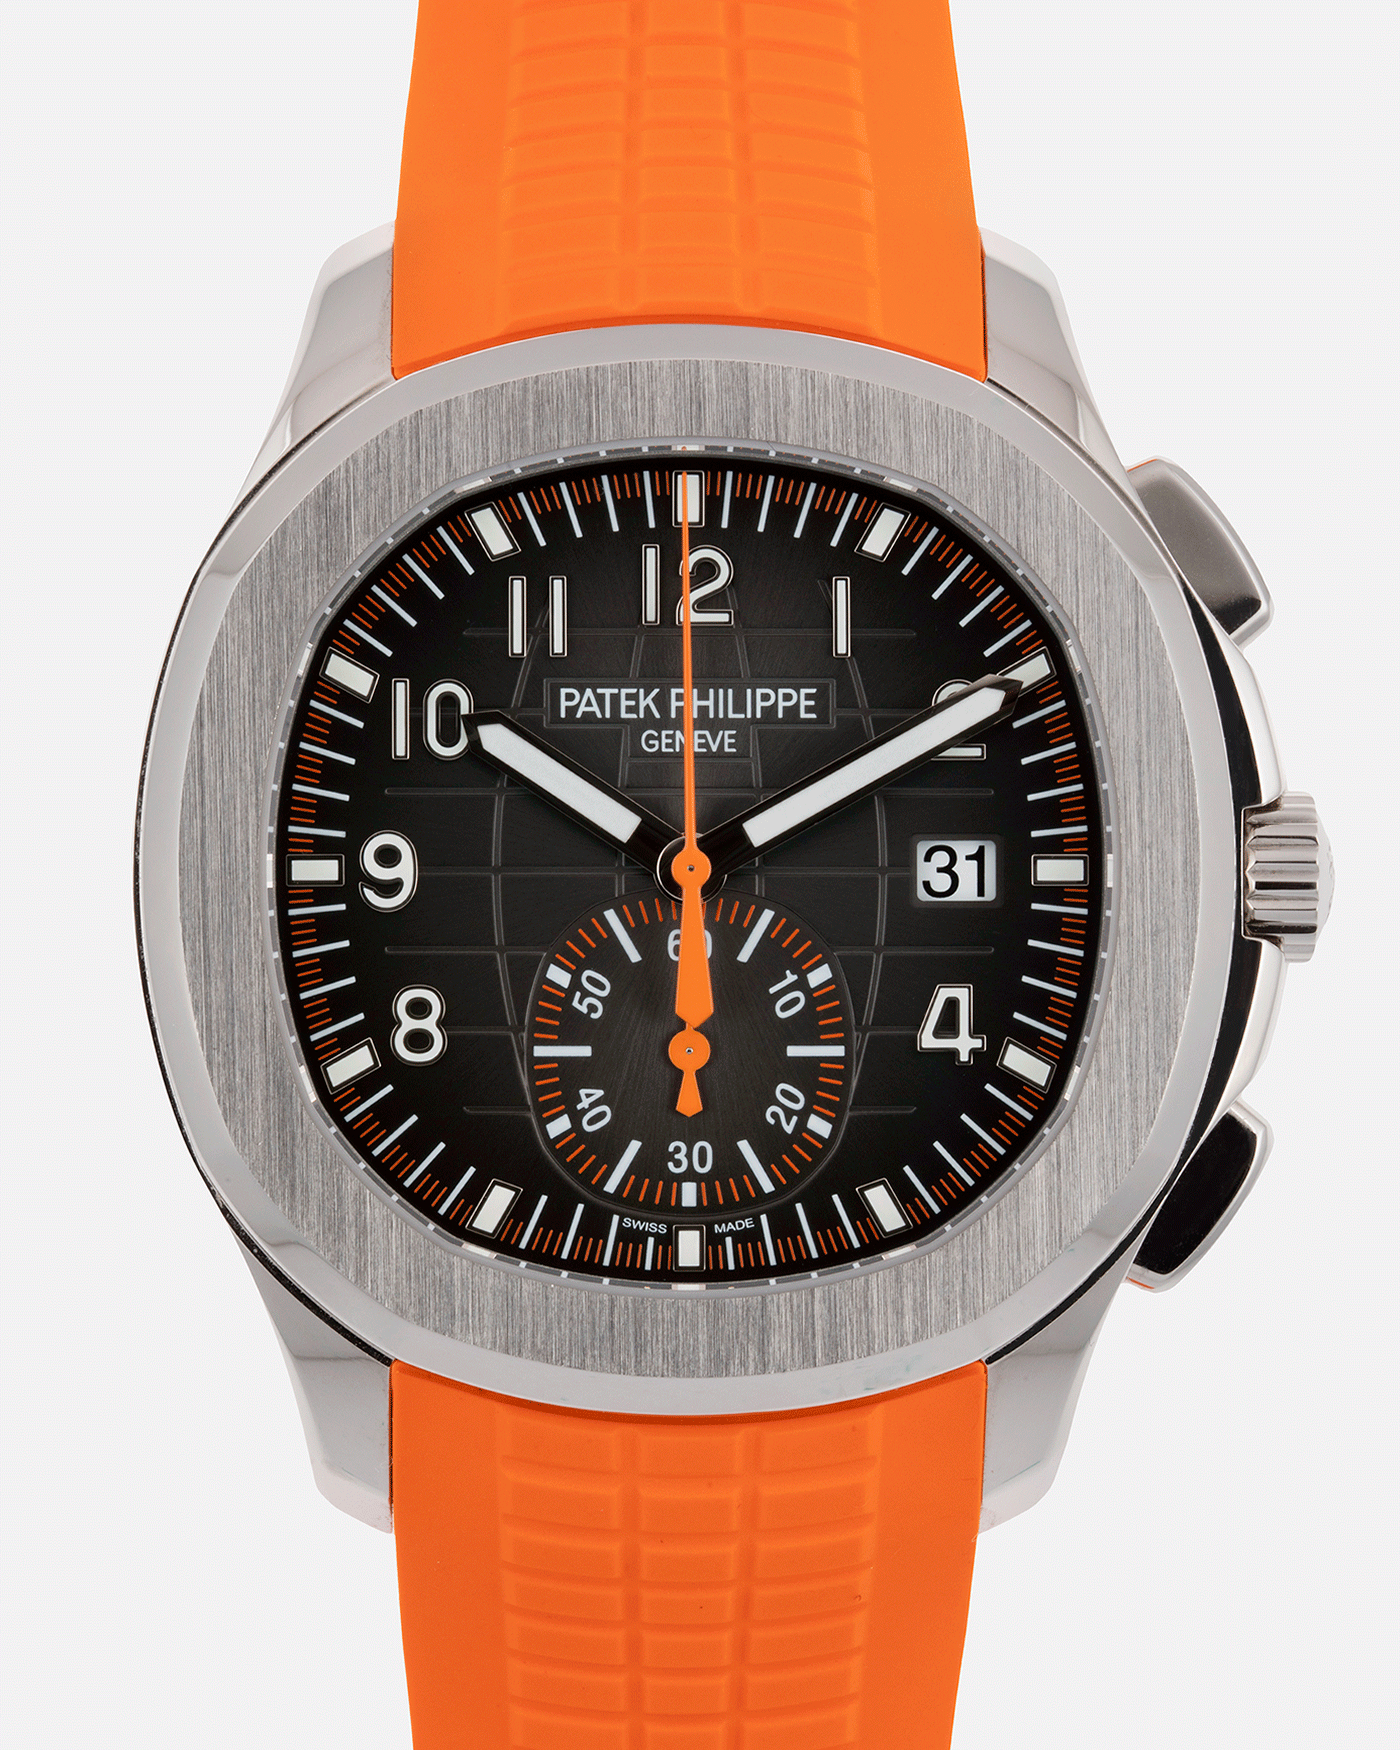 Brand: Patek Philippe Year: 2019 Model: Aquanaut Reference Number: 59689A Material: Stainless Steel Movement: Self Winding Patek Philippe Caliber CH 28-250 C Case Diameter: 42mm Strap: Patek Philippe Aquanaut Orange Rubber Strap and Two Additional Uncut Black and Orange Rubber Straps